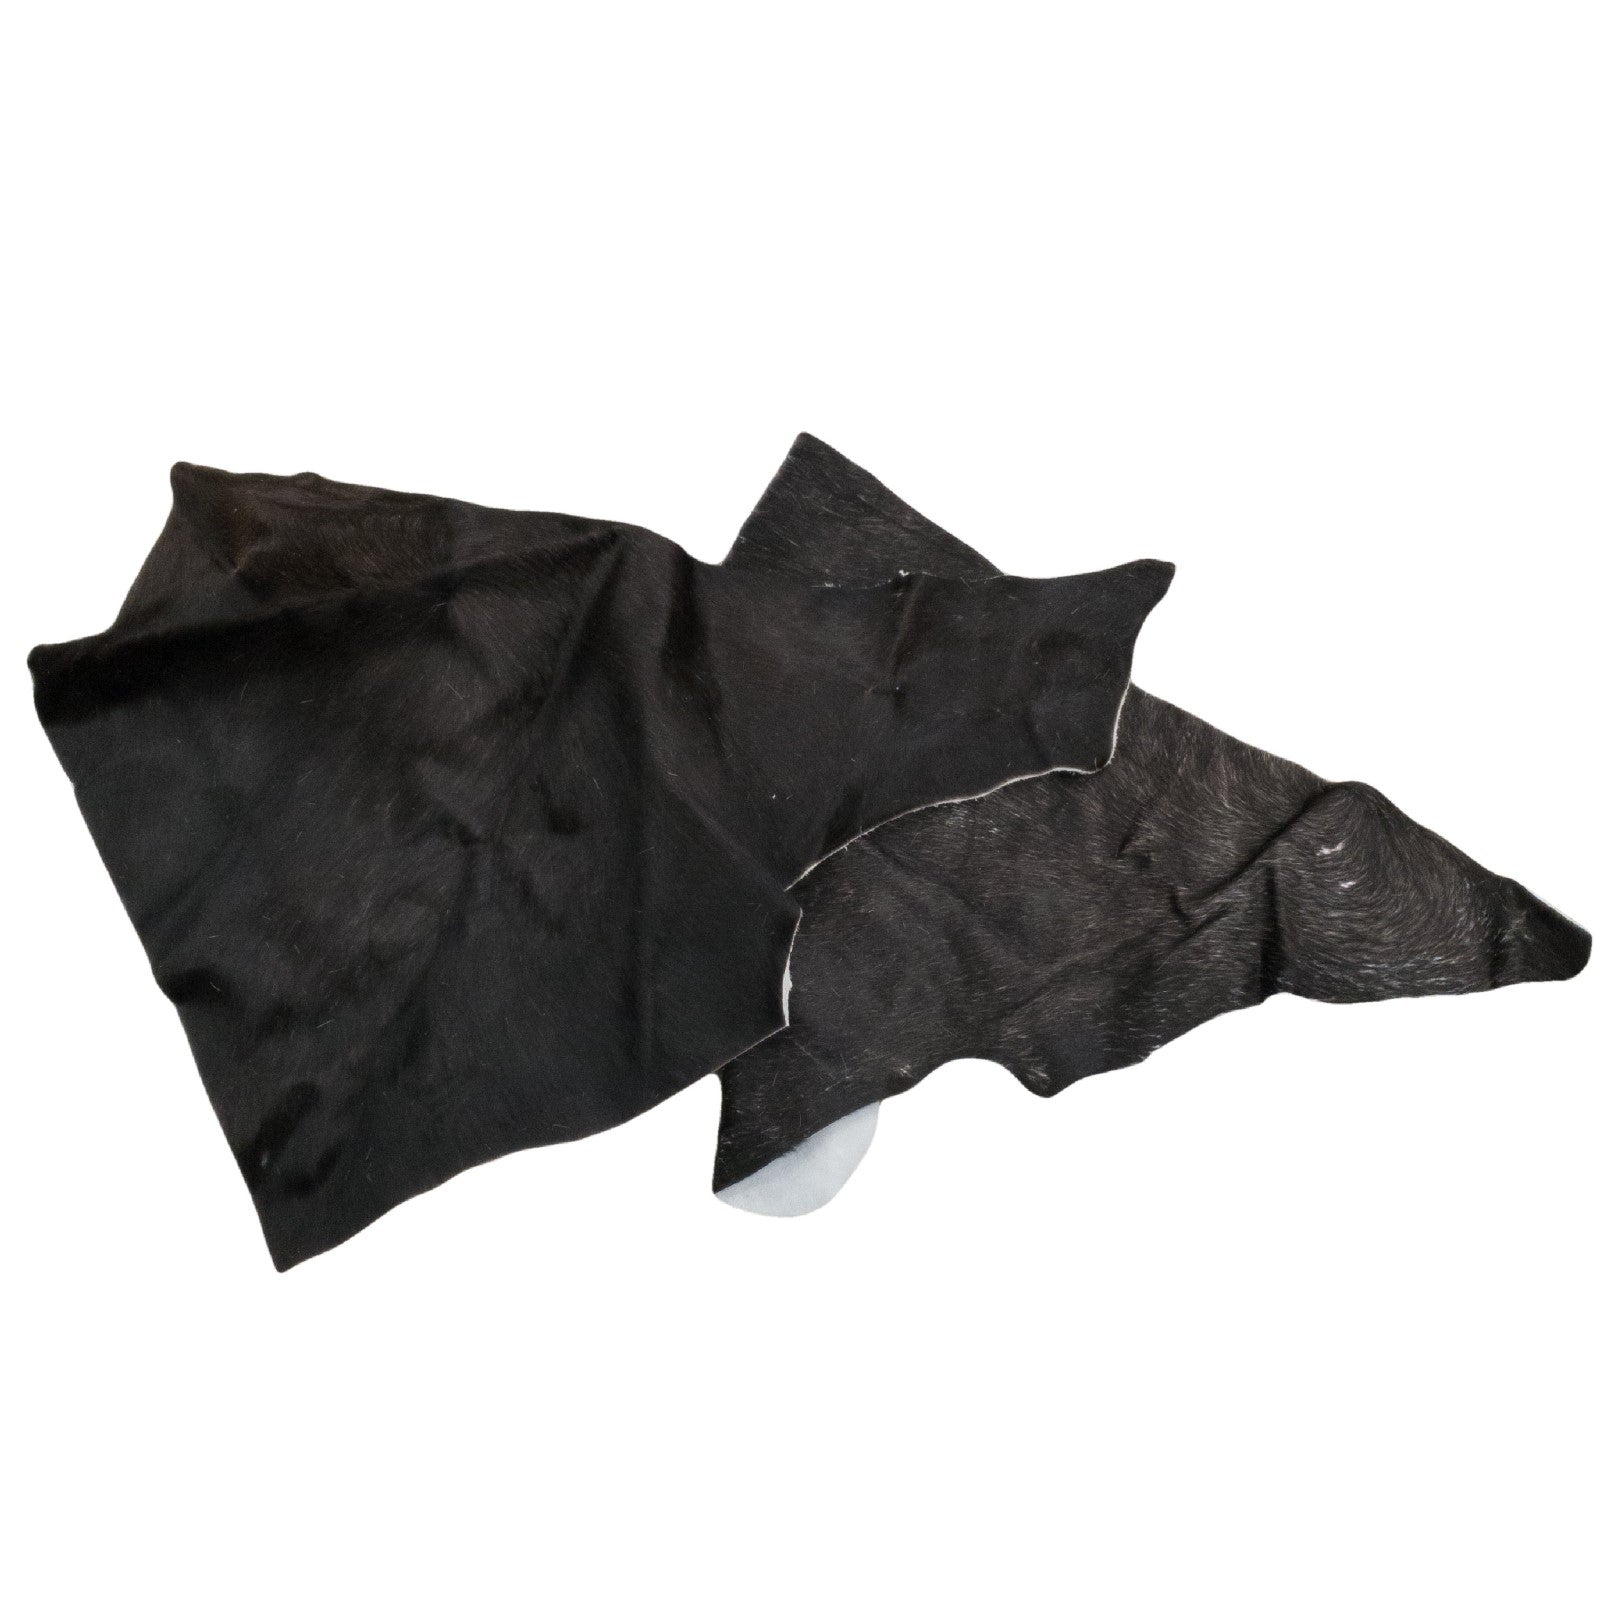 Solid Color, Hair-on Cowhide Scrap Remnant Bags, Large Black (1-3 SqFt) / 1 LB | The Leather Guy